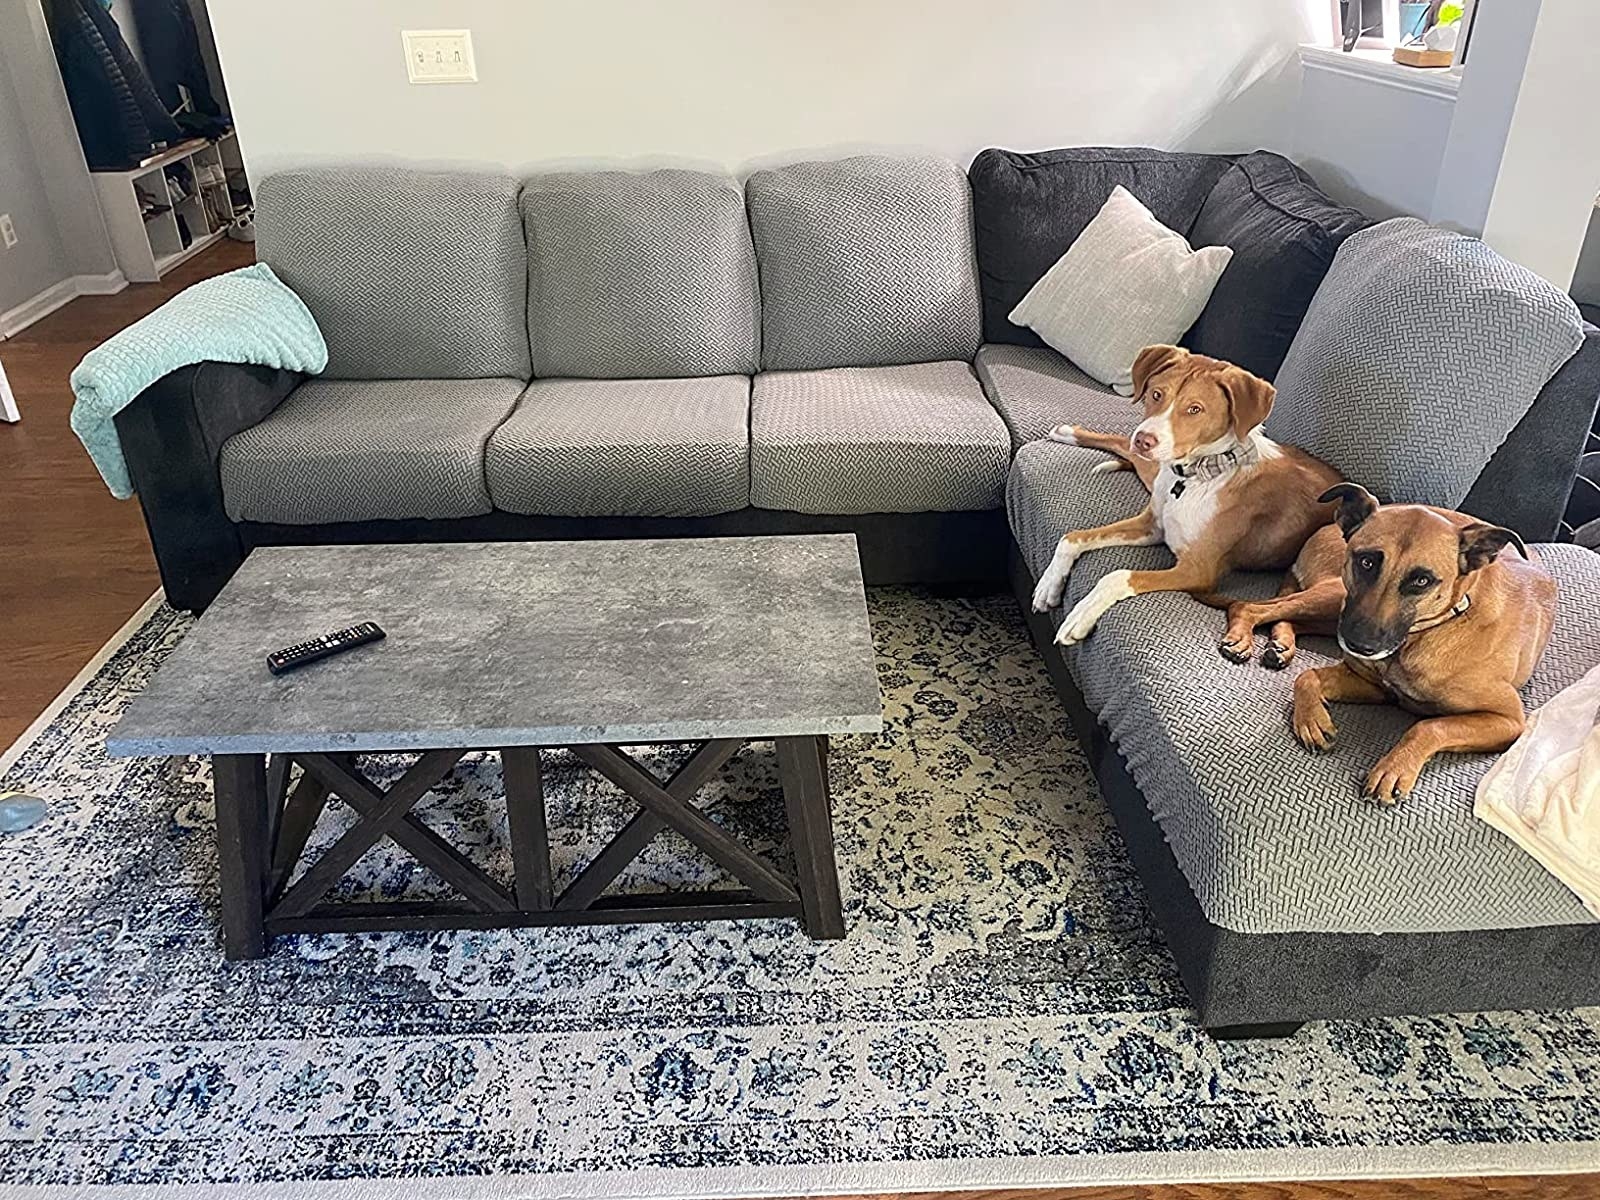 Gray sectional covered in slipcovers with dogs enjoying the sofas